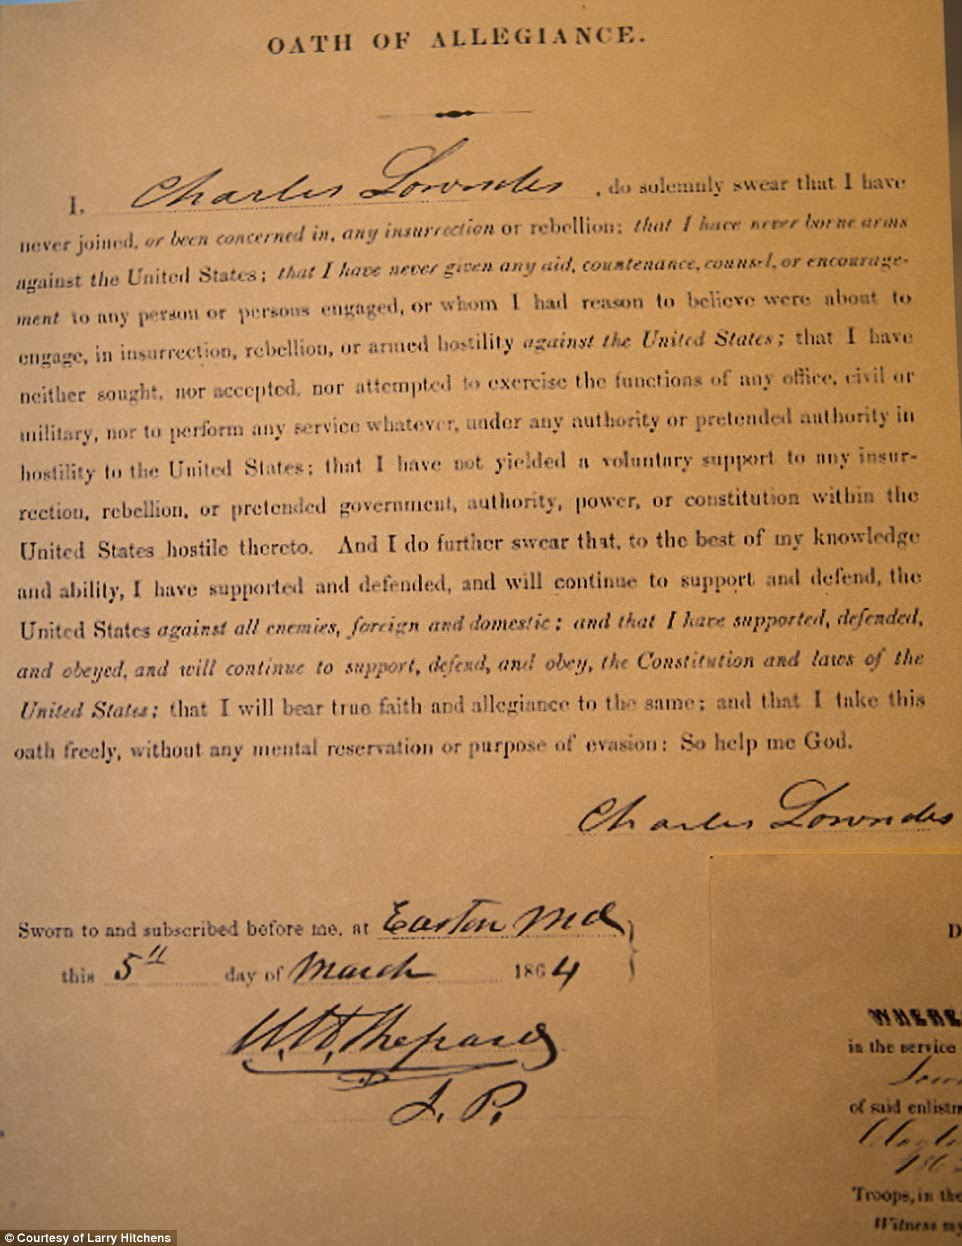 In order to allow their African American slaves to enlist in the Union Army, slave owners had to be deemed 'loyal Unionists'. Pictured is an 'Oath of Allegiance' signed by Charles Lowndes, who owned Ennels Clayton, one of the 18 Unionville founders. This document is on display at the Historical Society of Talbot County Unionville Exhibit